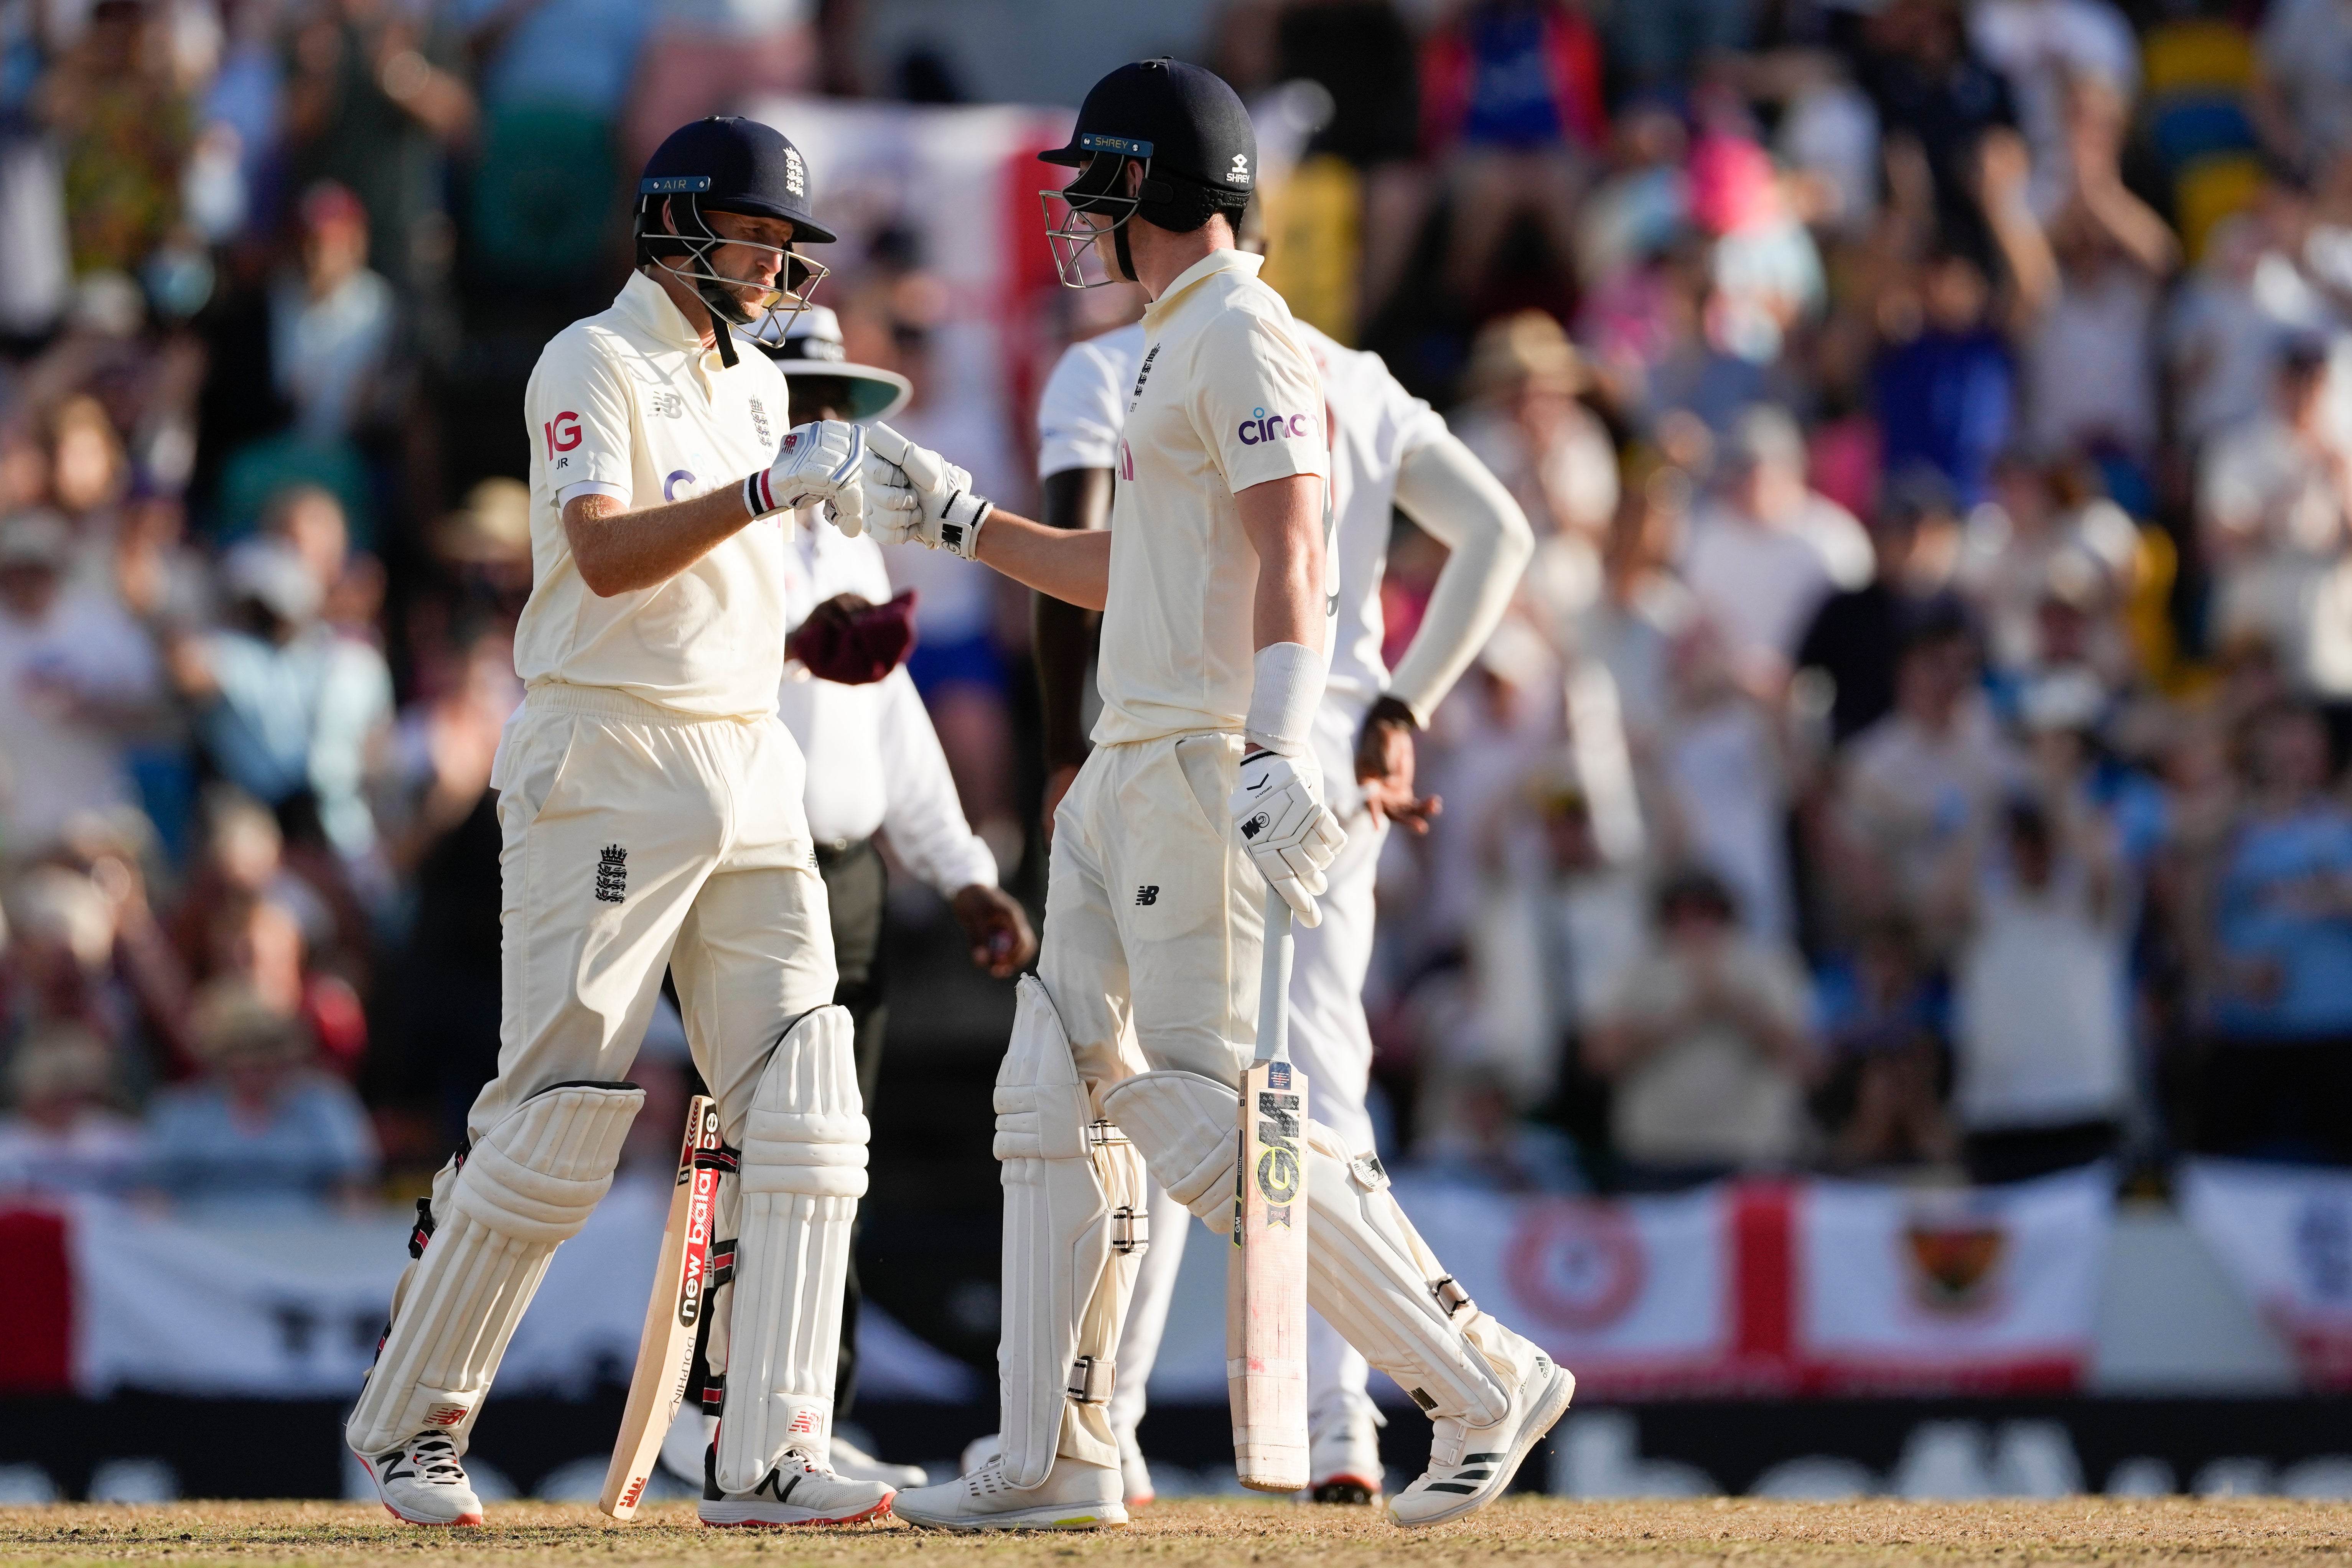 England racked up the runs on day one, with Joe Root and Dan Lawrence doing the bulk of the damage